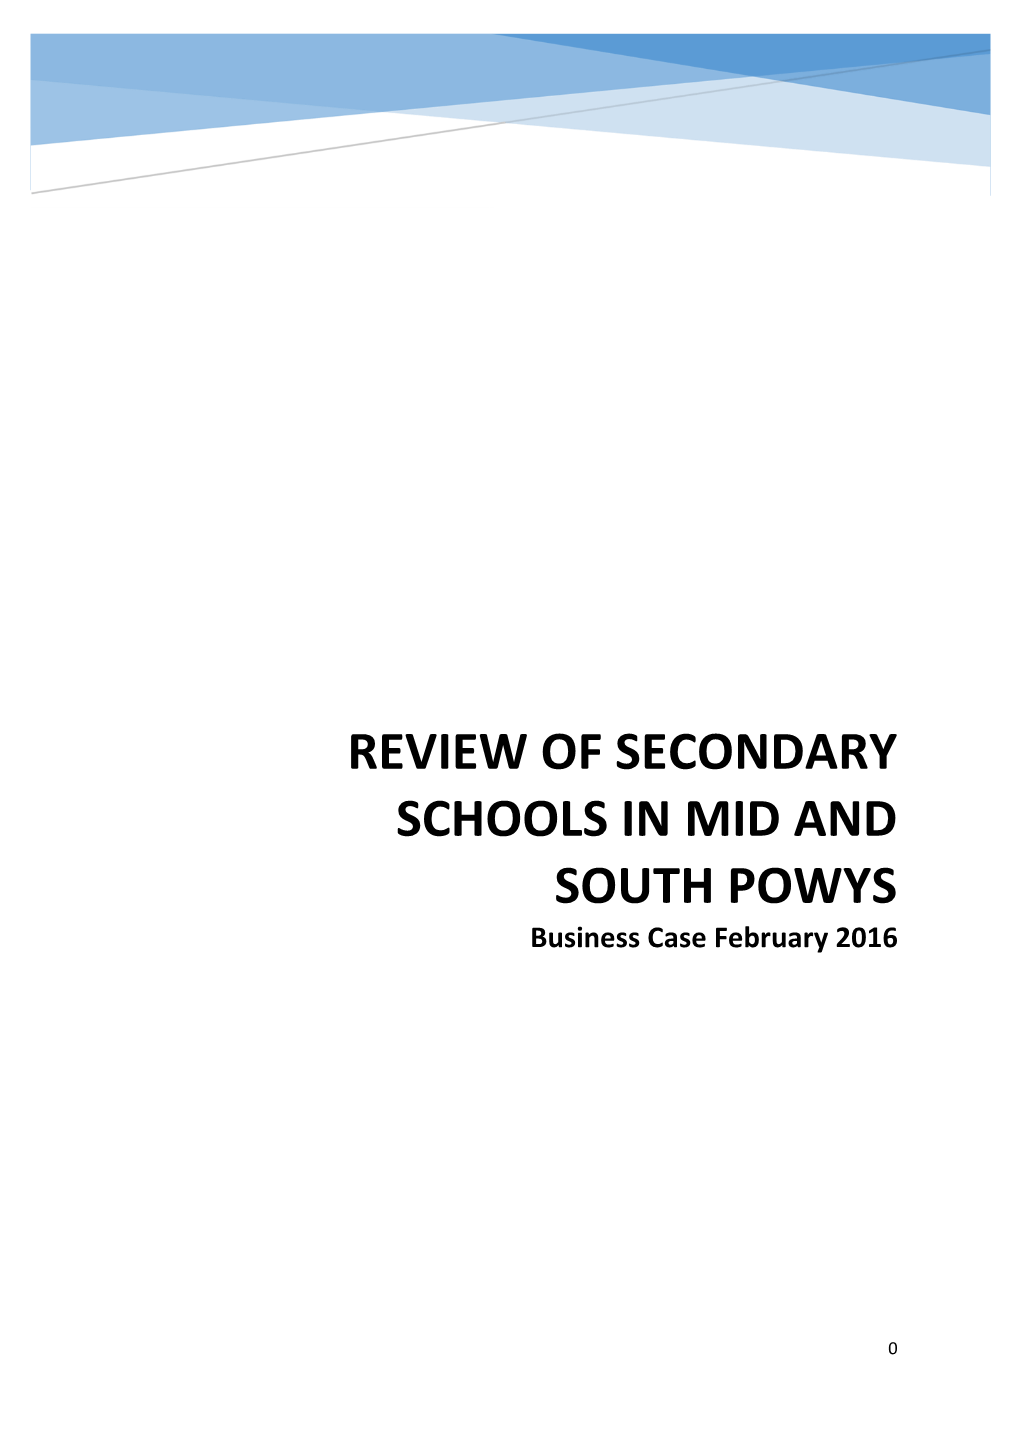 REVIEW of SECONDARY SCHOOLS in MID and SOUTH POWYS Business Case February 2016